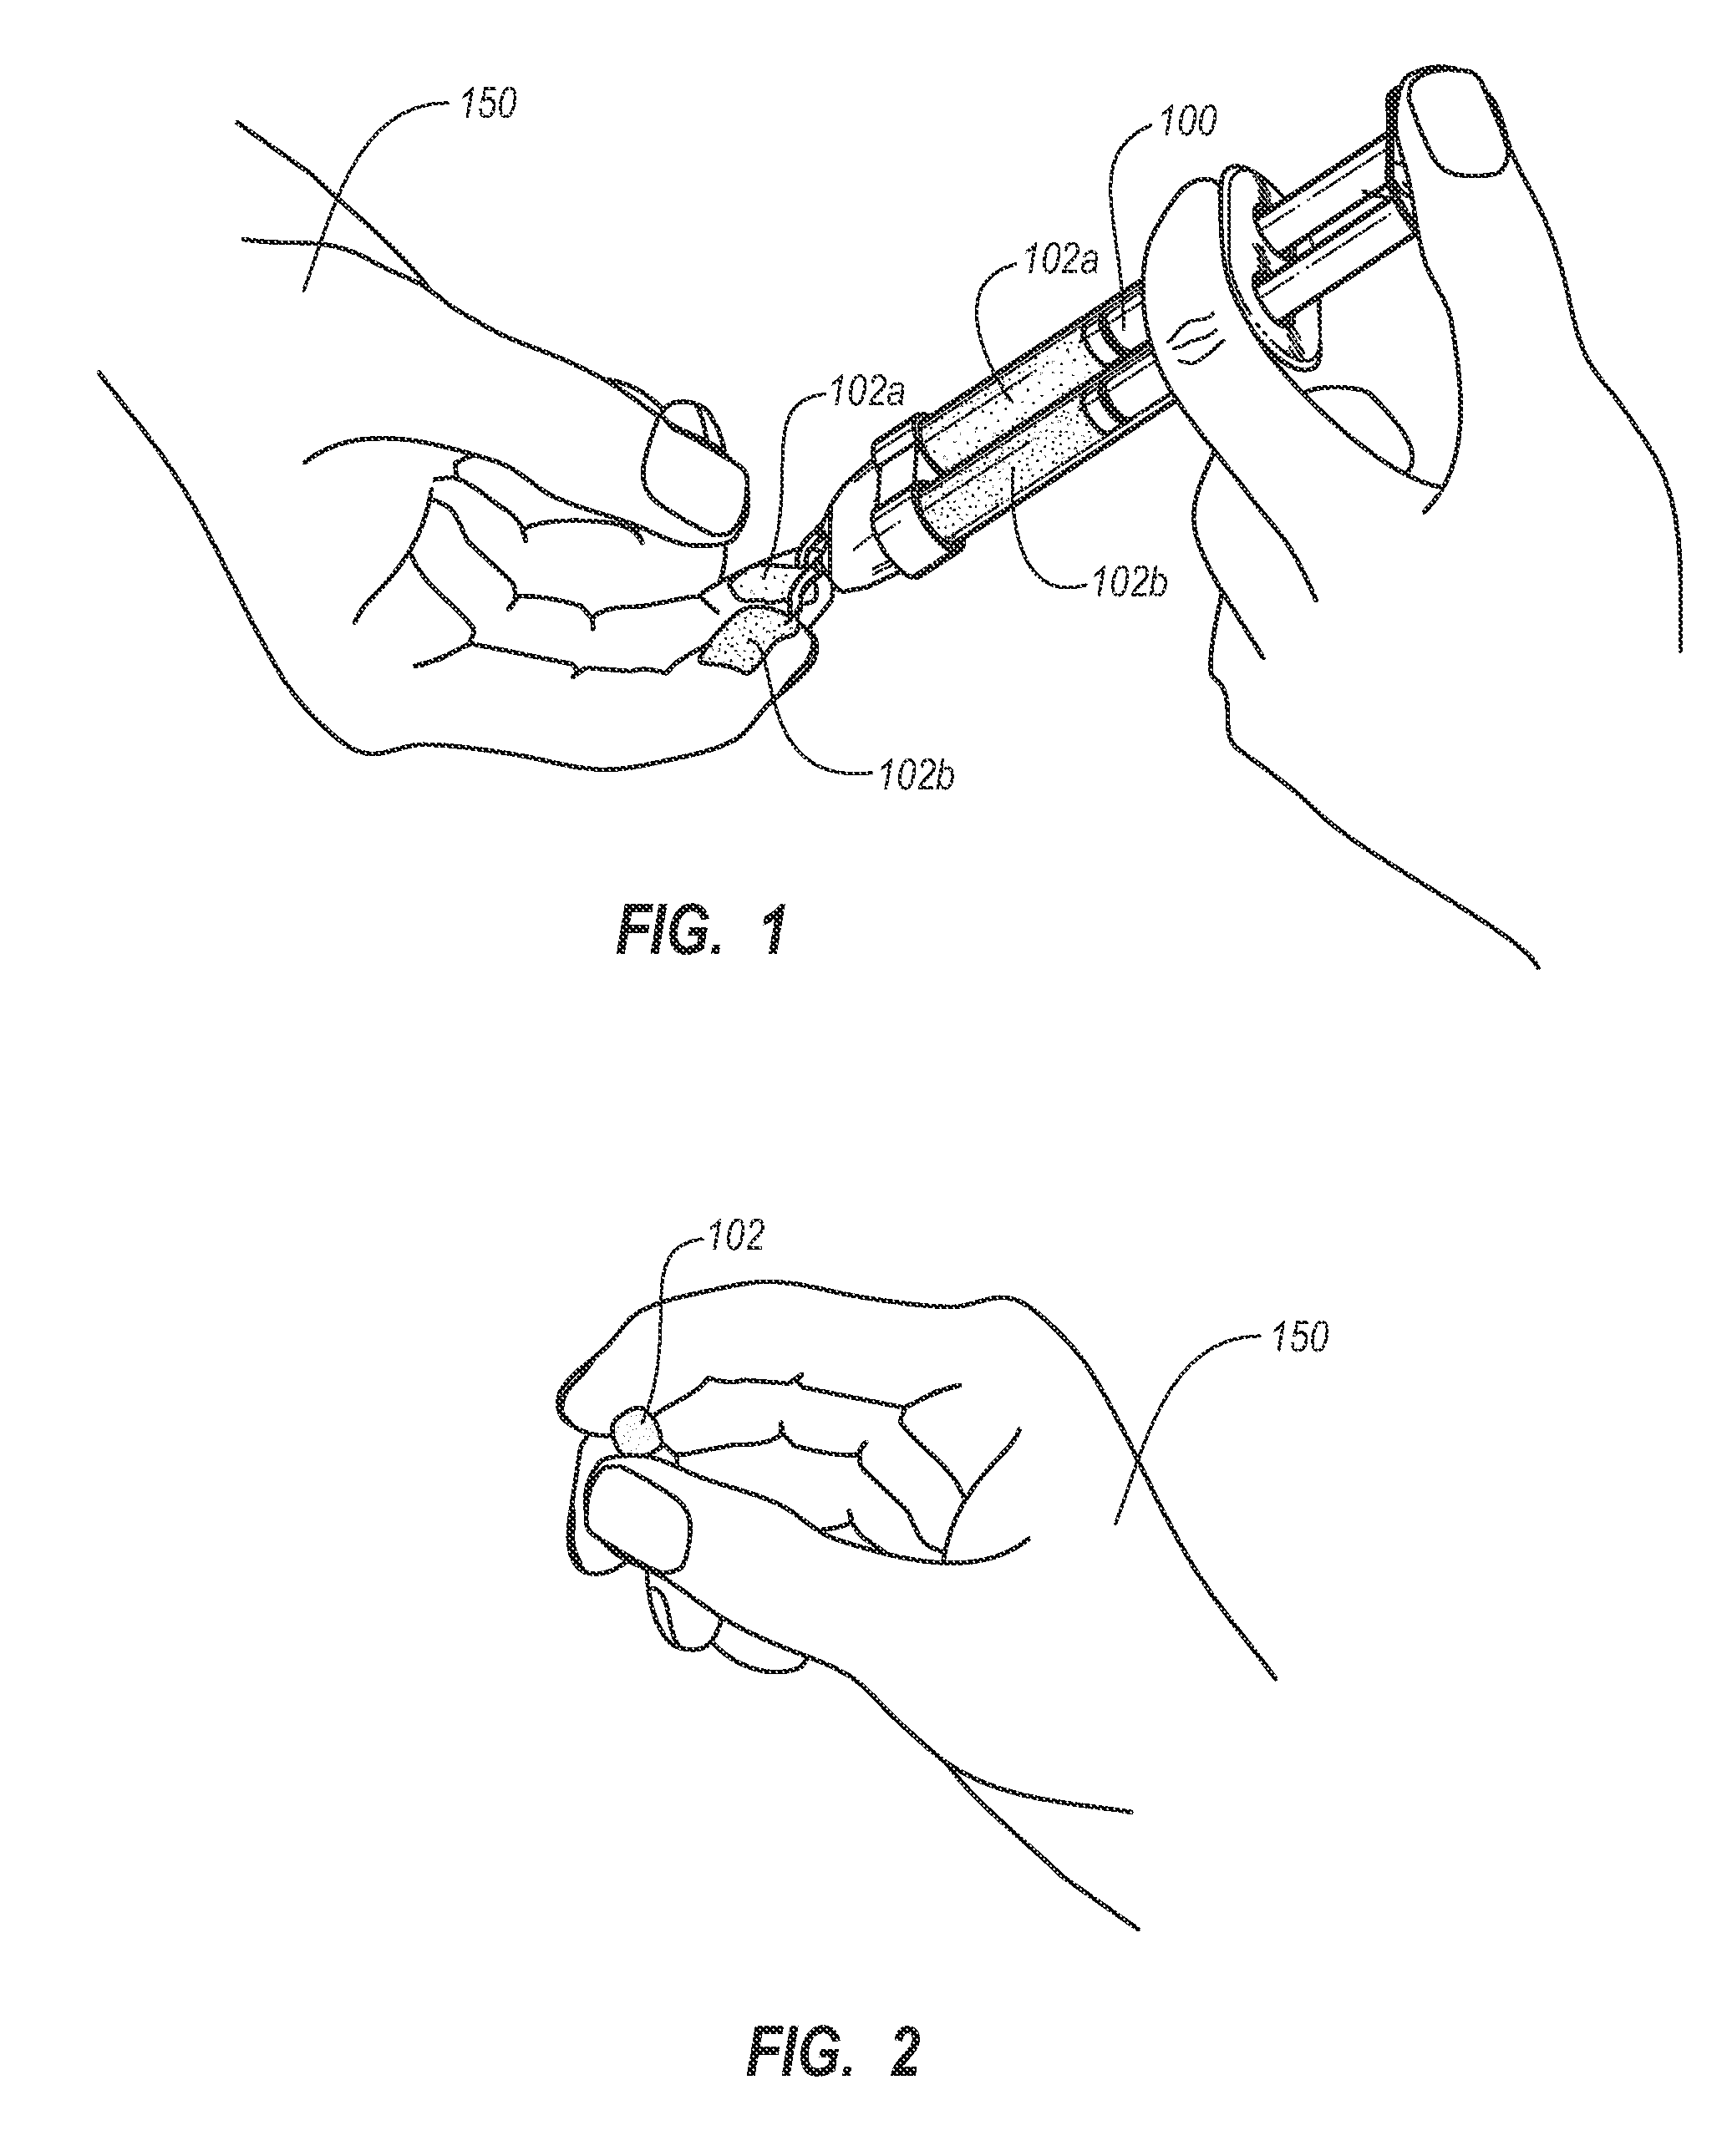 Polymerizable temporary coating methods and systems for intraoral devices